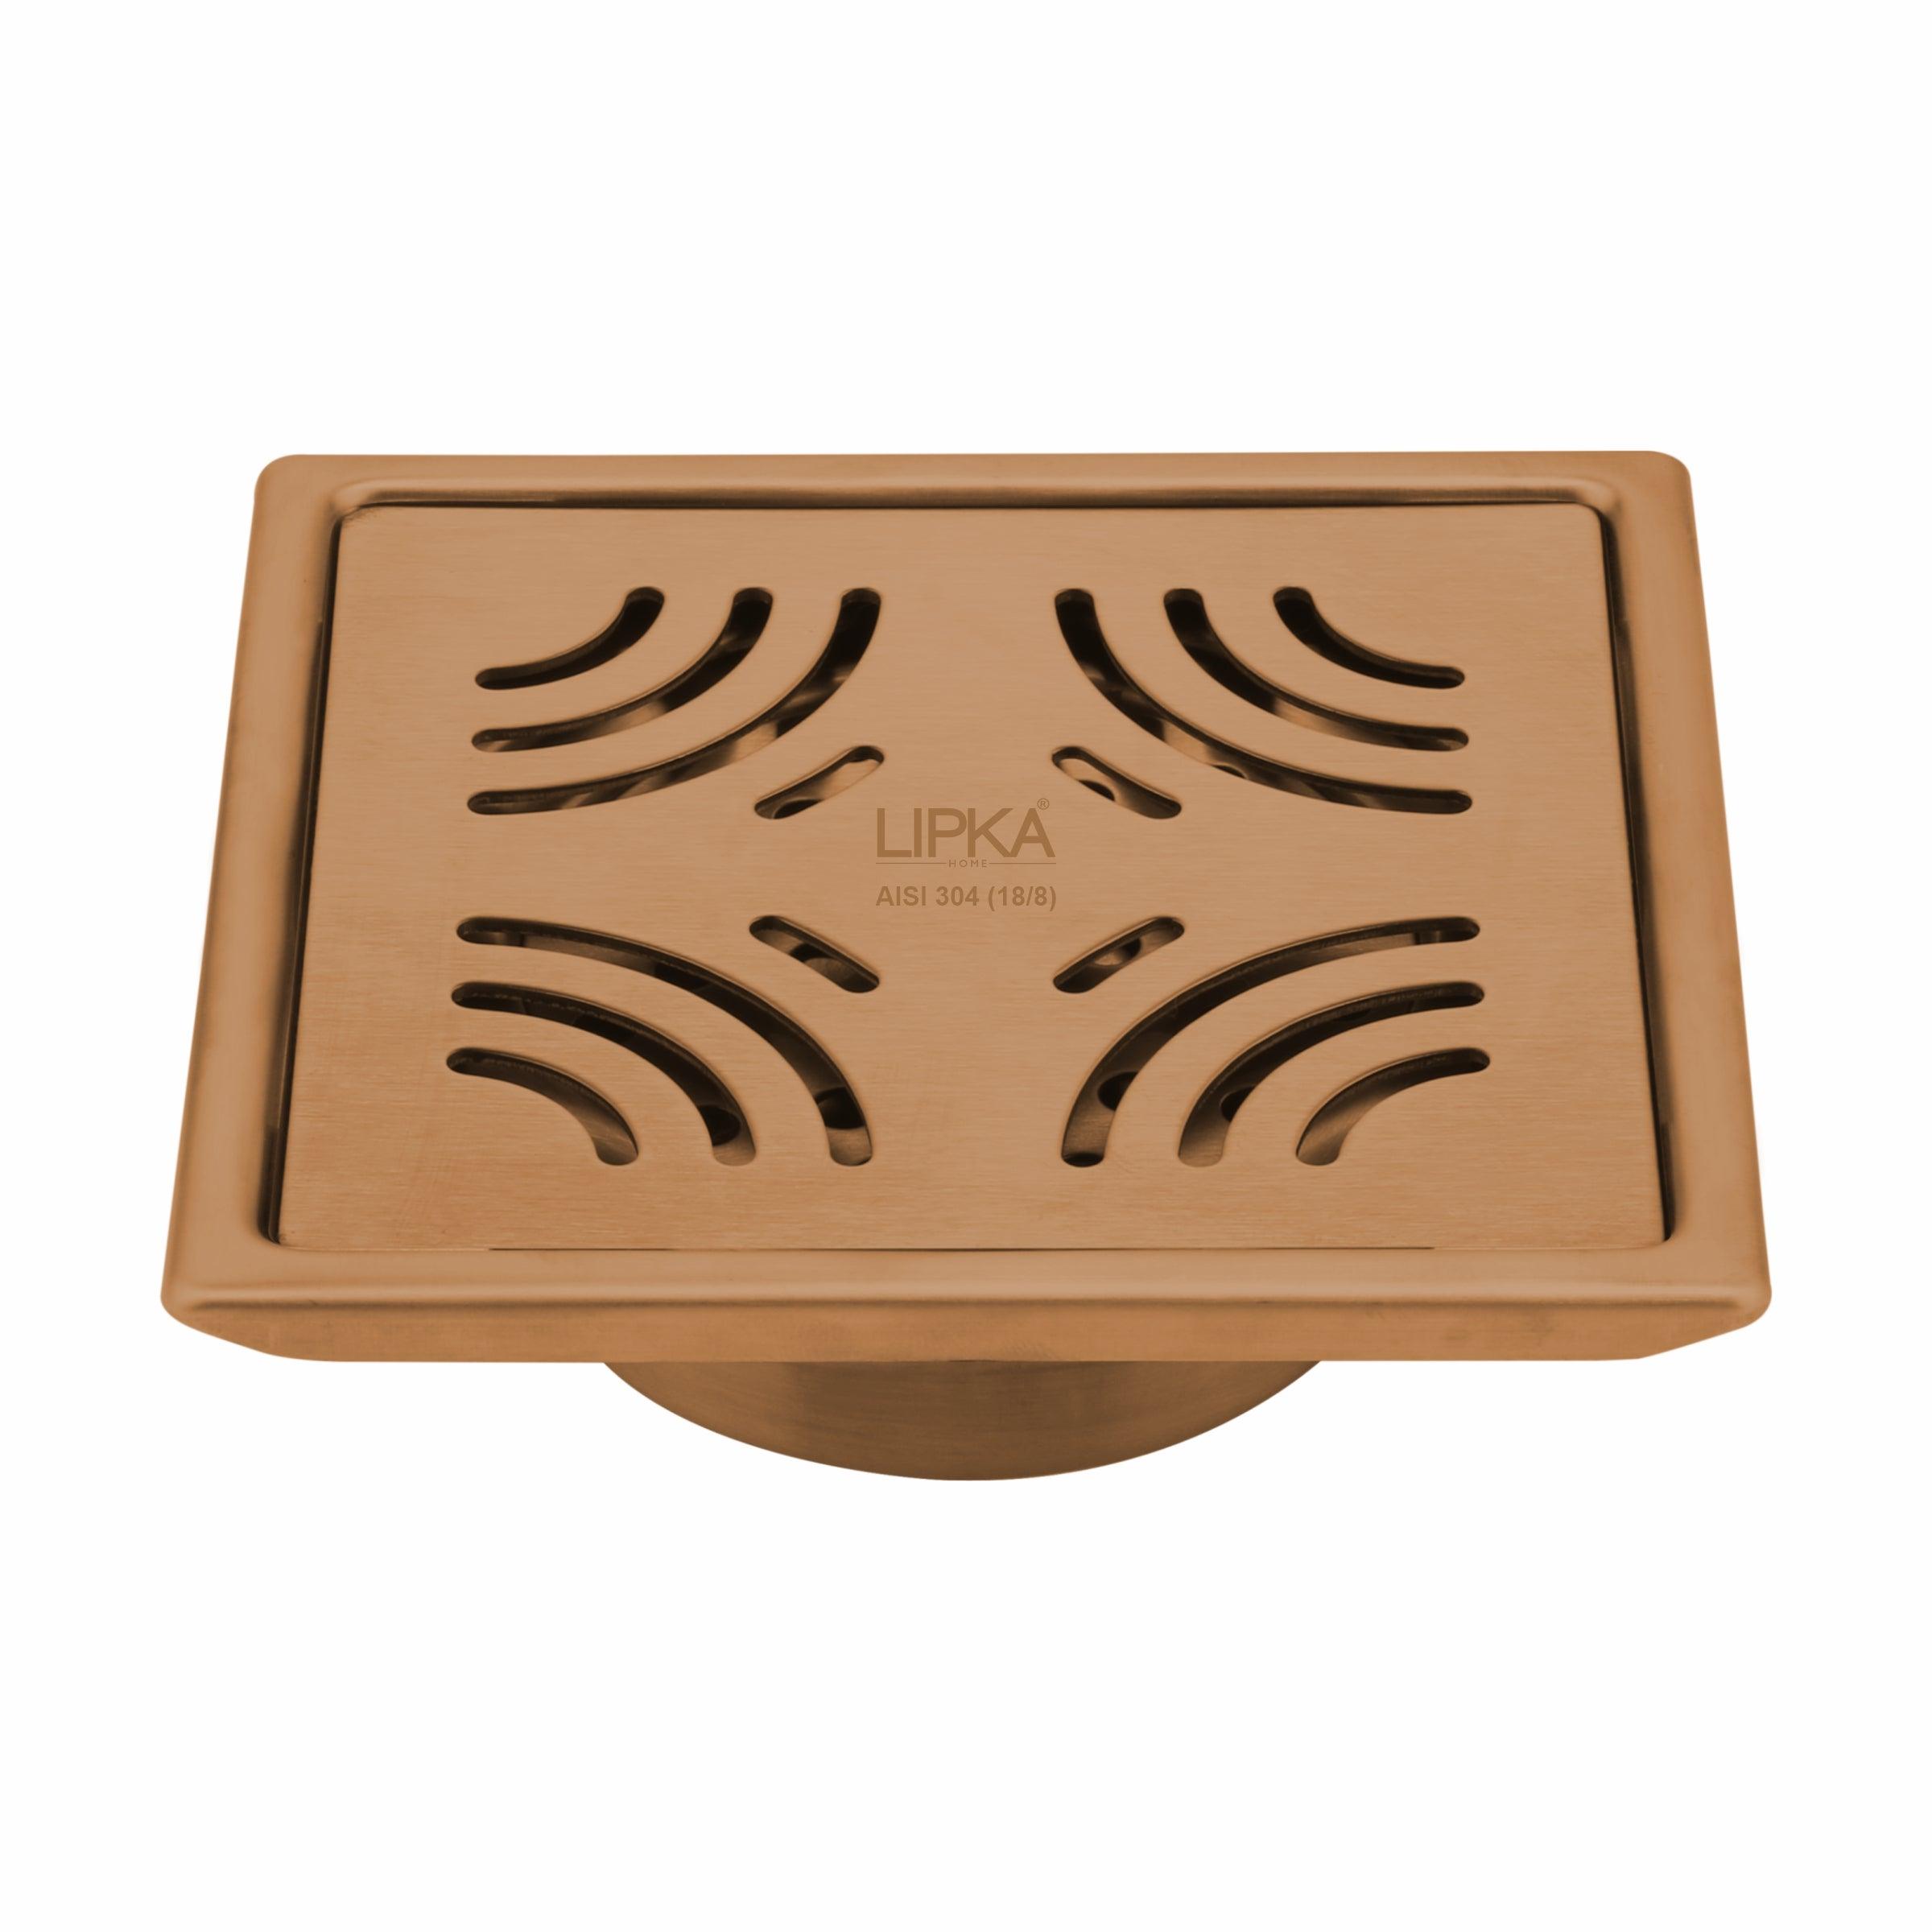 Purple Exclusive Square Floor Drain in Antique Copper PVD Coating (5 x 5 Inches) with Cockroach Trap - LIPKA